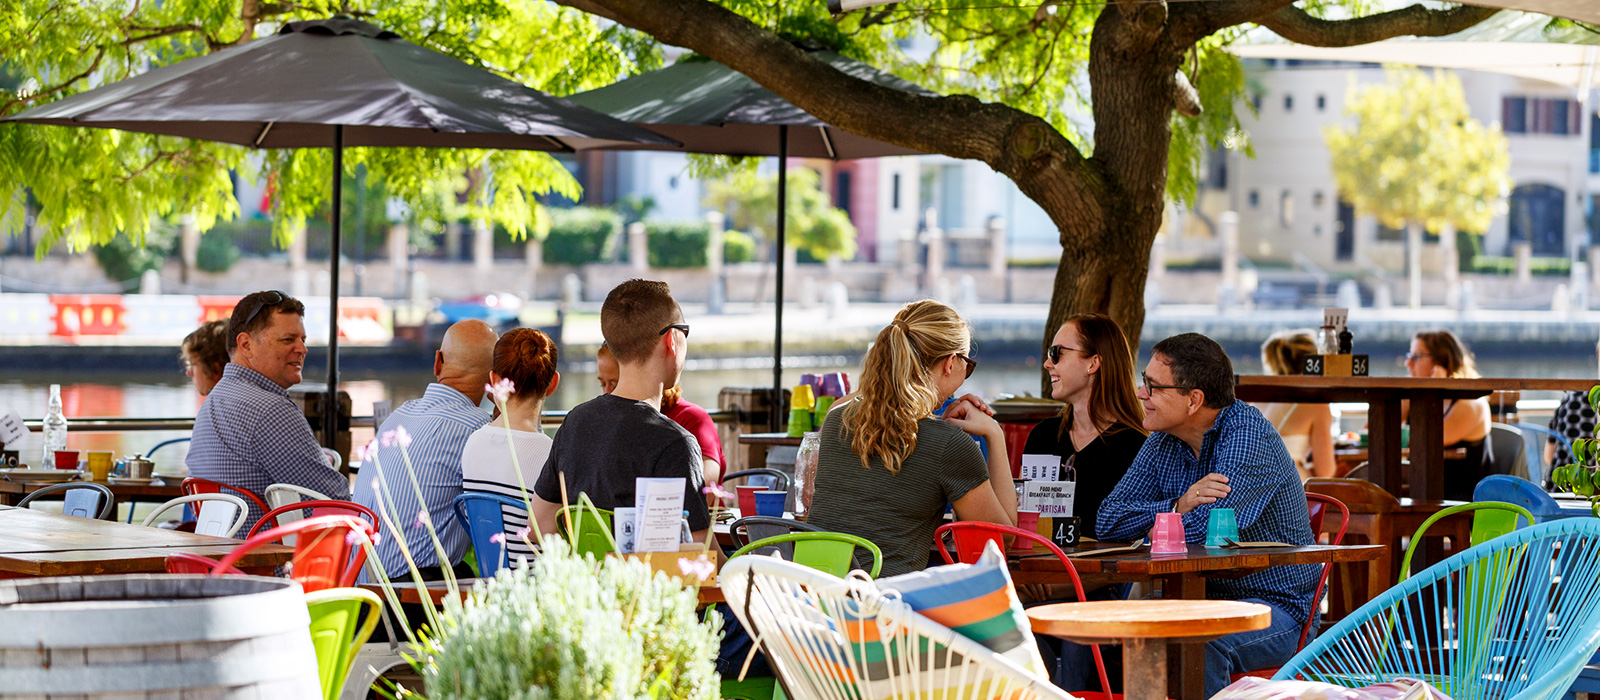 Choose from hundreds of cafes in and around Perth